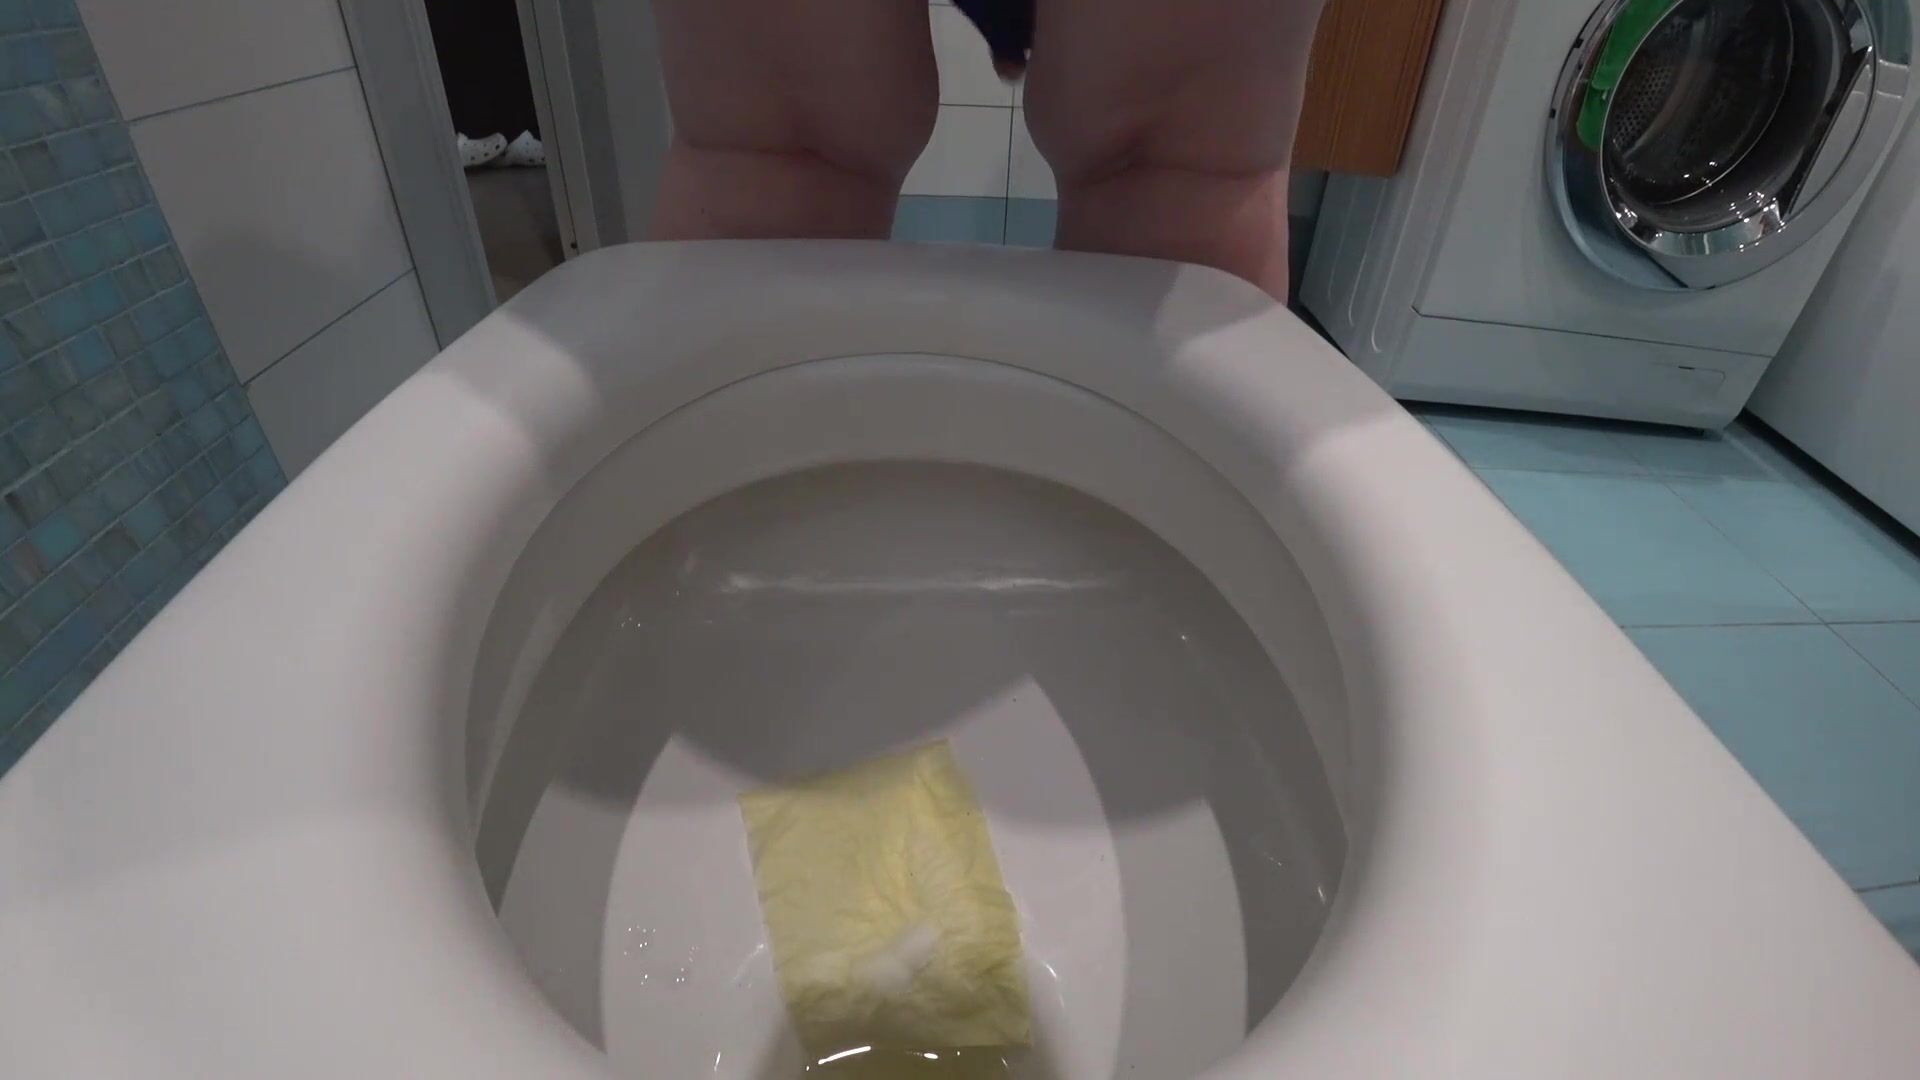 Hidden camera in the toilet at home. Husband wants to spy on mature wife when she pisses